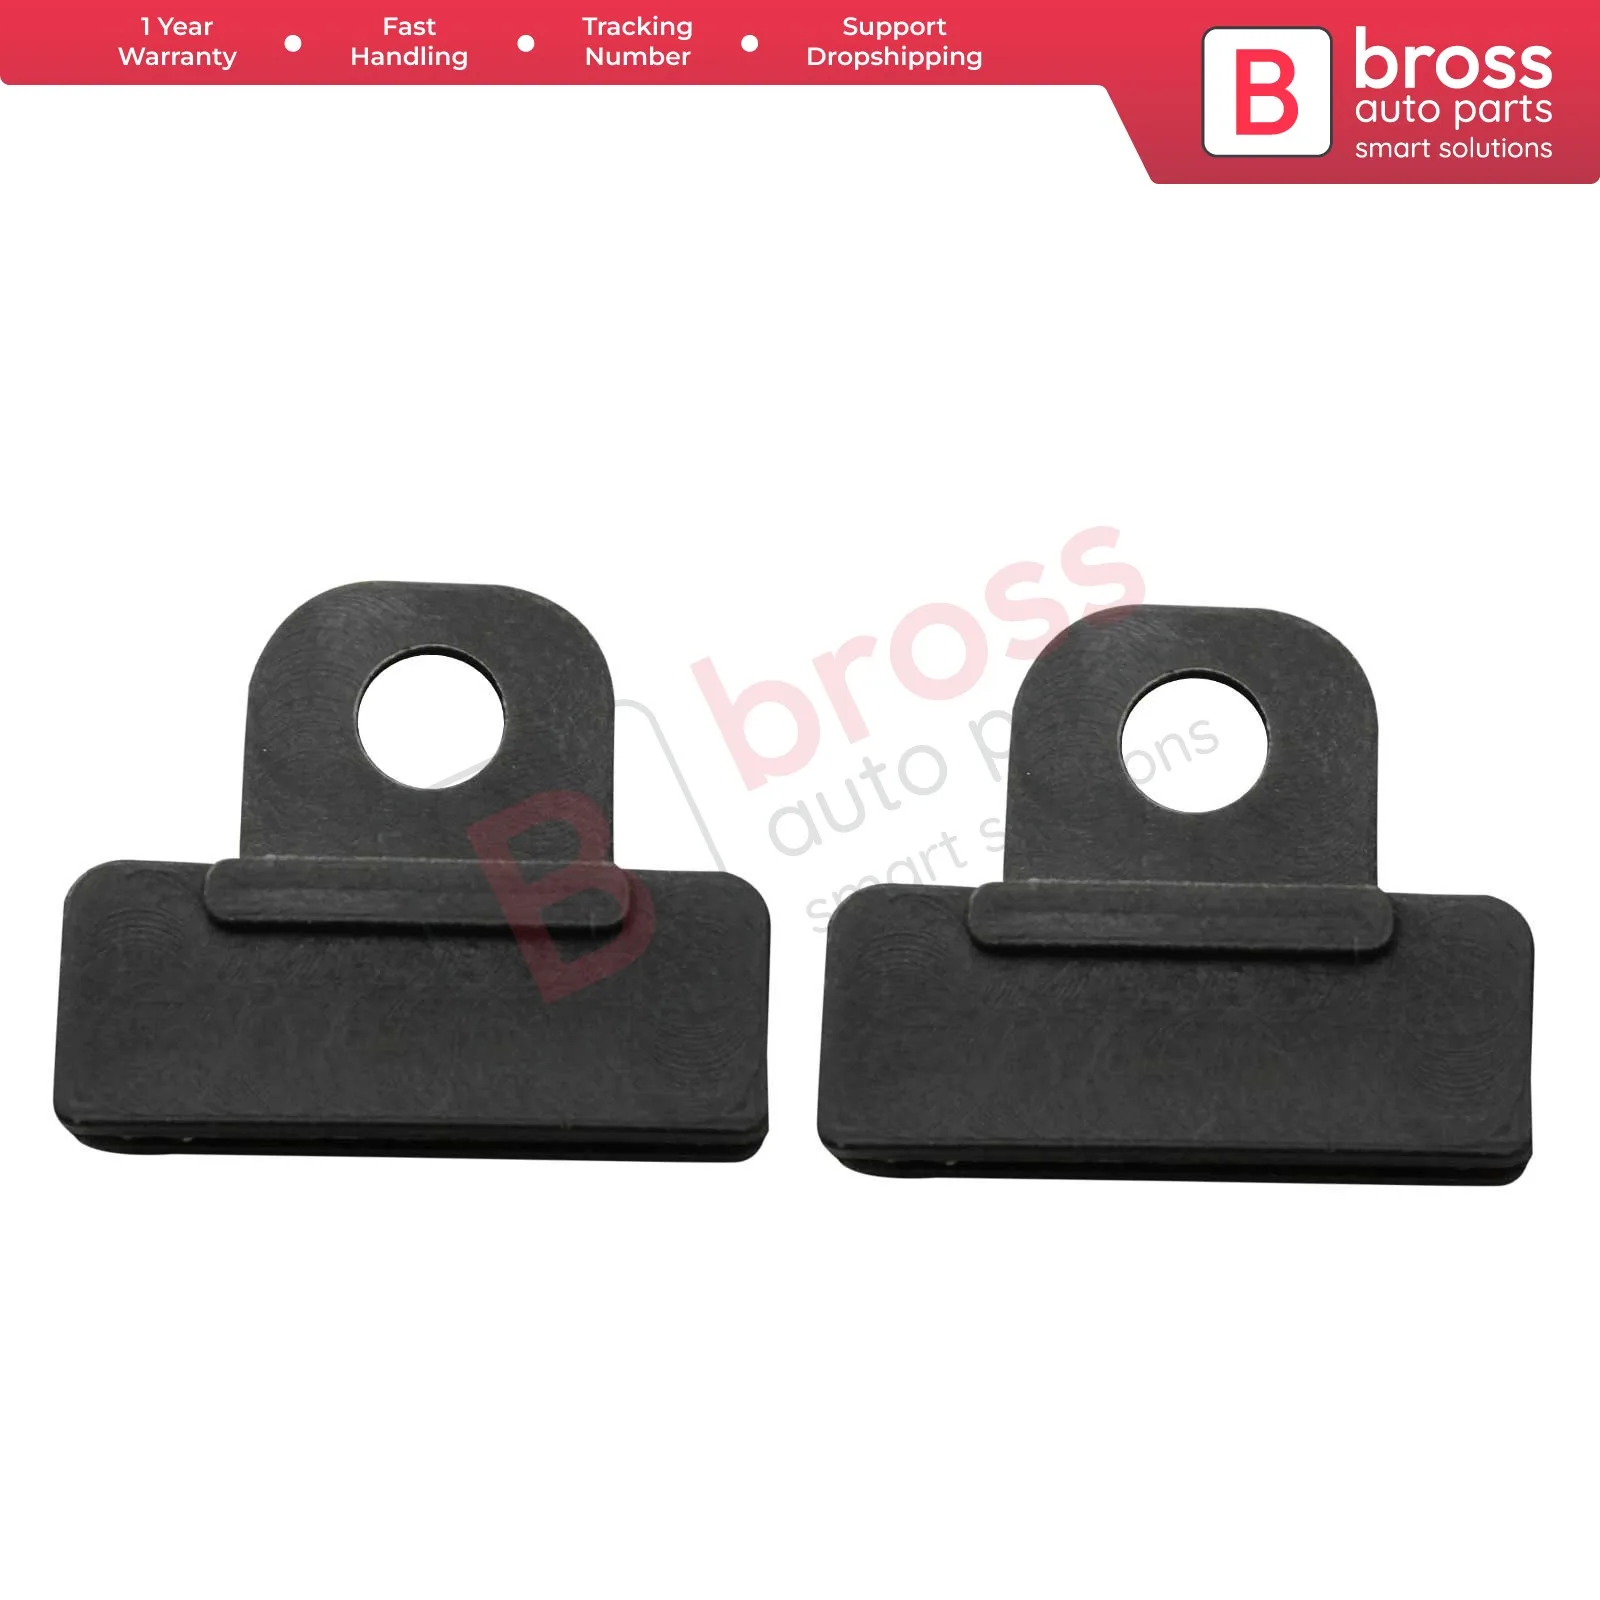 

Bross Auto Parts BWR5023 2 Pieces Electrical Power Window Regulator Glass Channel Slider Sash Connector Clips for Toyota Type 2